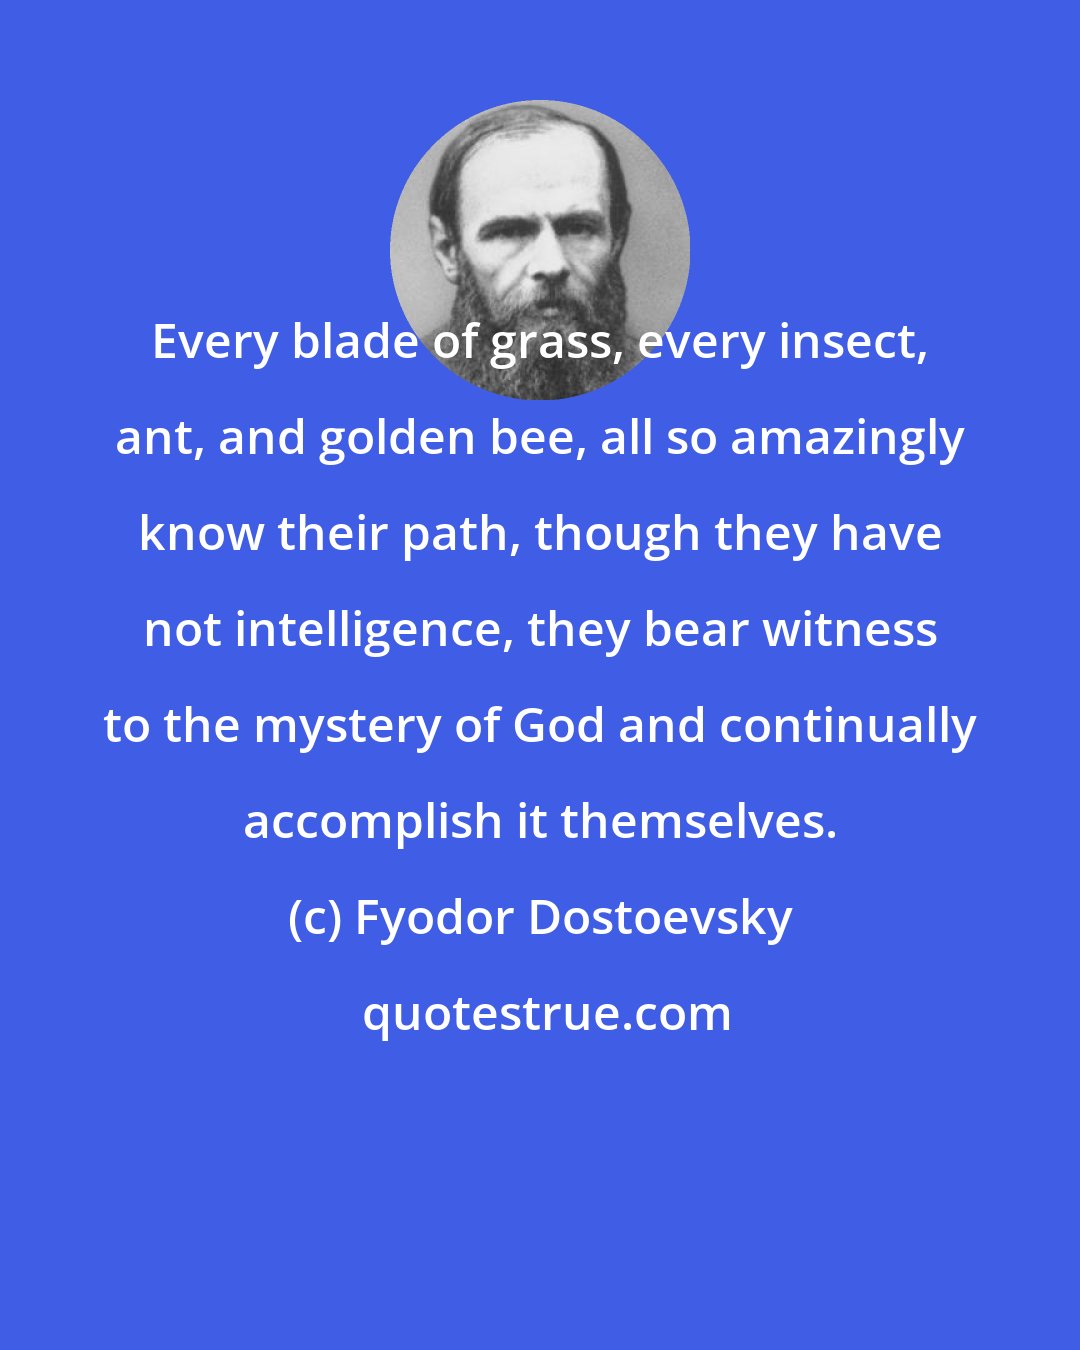 Fyodor Dostoevsky: Every blade of grass, every insect, ant, and golden bee, all so amazingly know their path, though they have not intelligence, they bear witness to the mystery of God and continually accomplish it themselves.